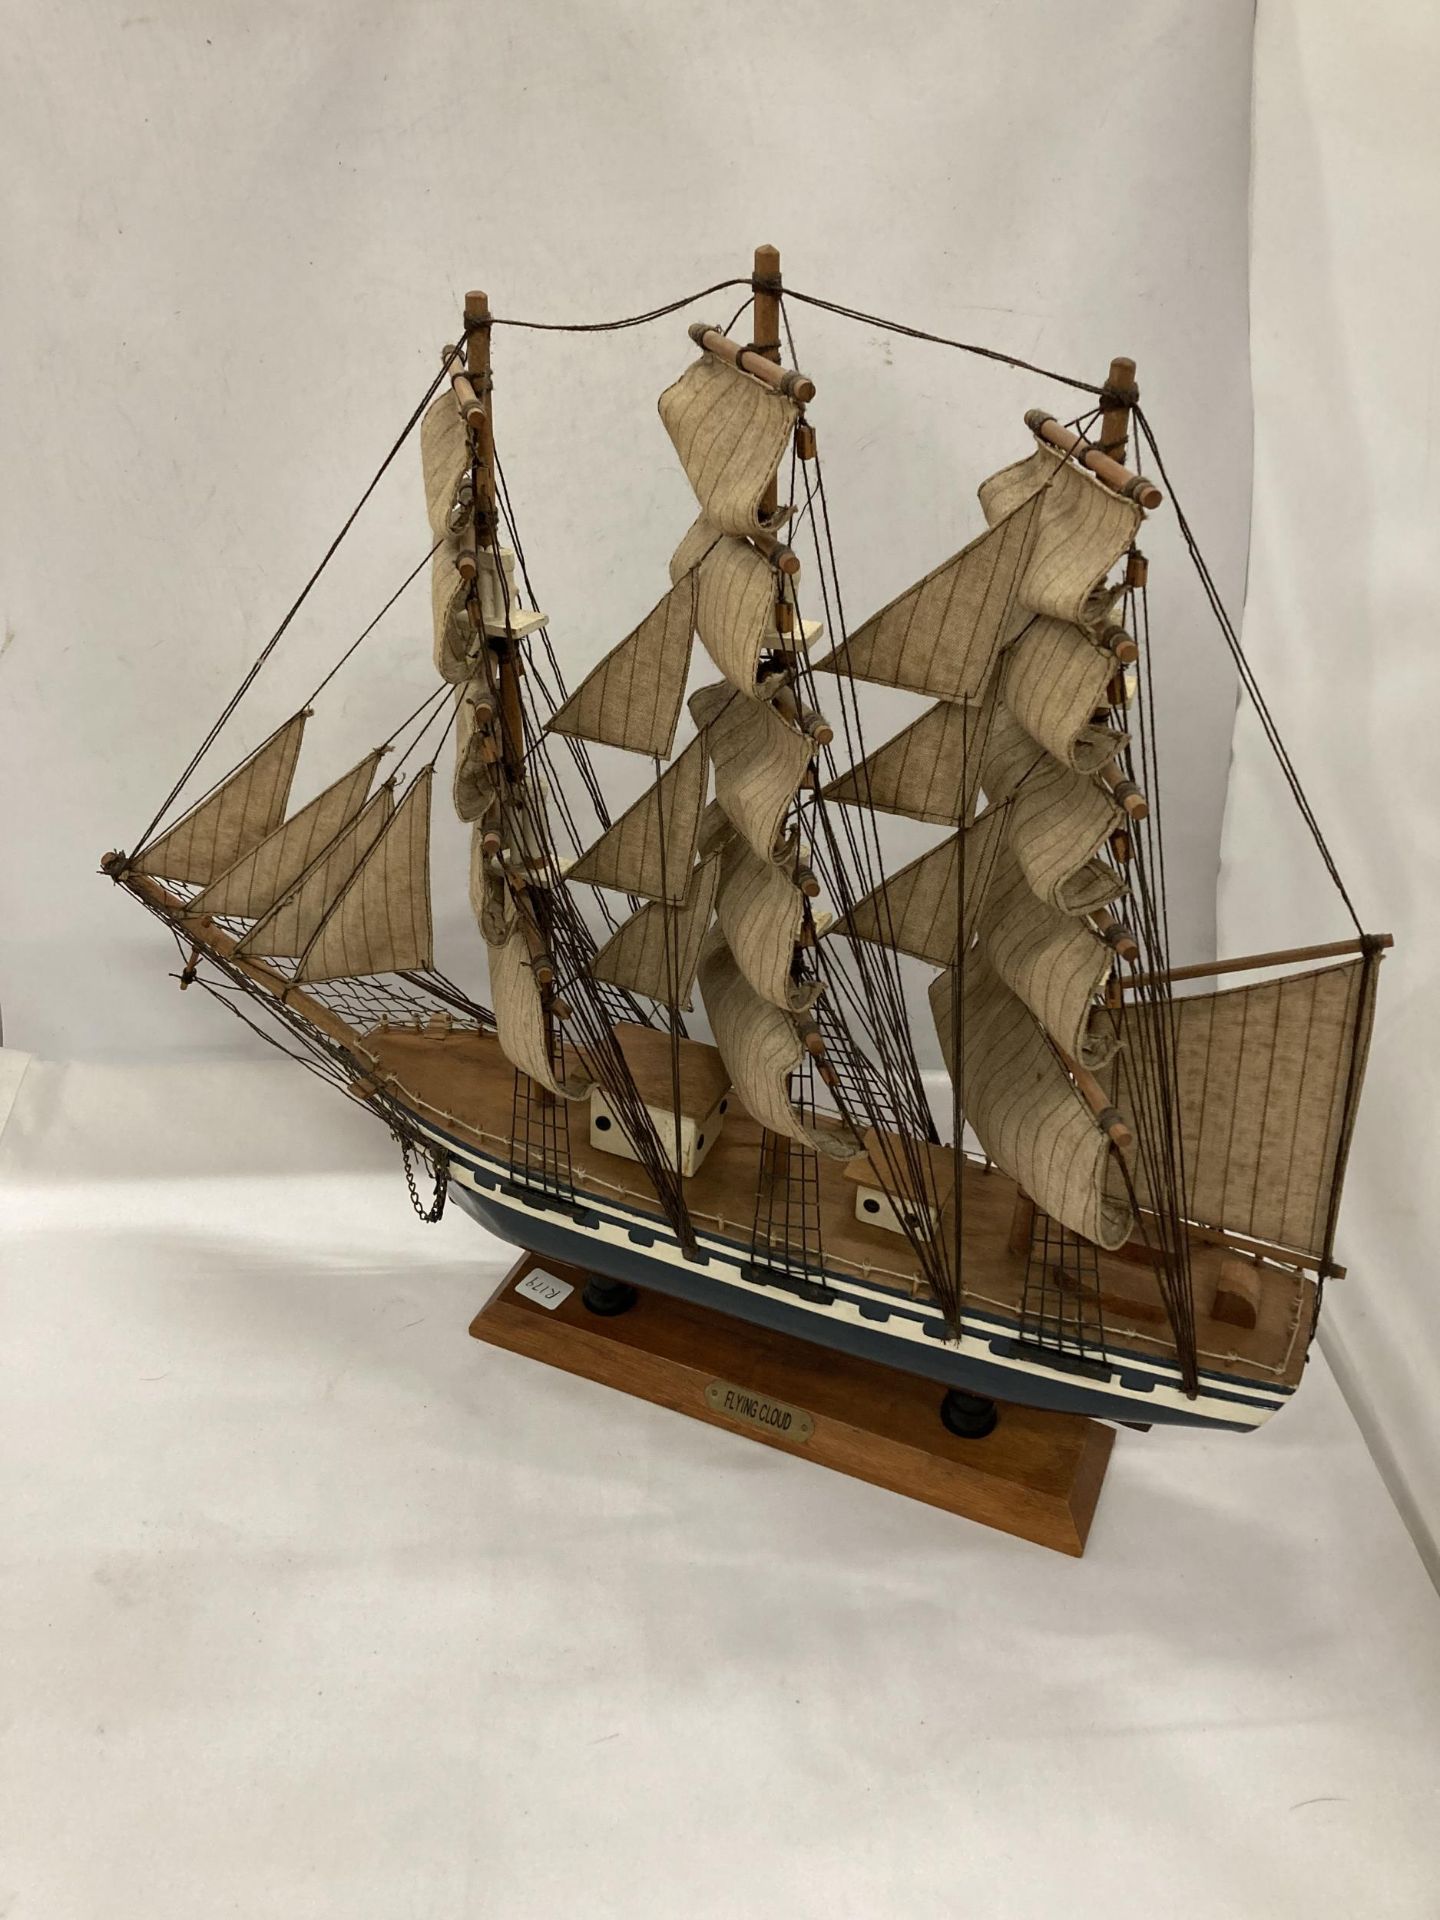 TWO WOODEN MODELS OF SAILING SHIPS, HEIGHTS 45CM AND 35CM, LENGTHS 51CM AND 35CM - Image 2 of 7